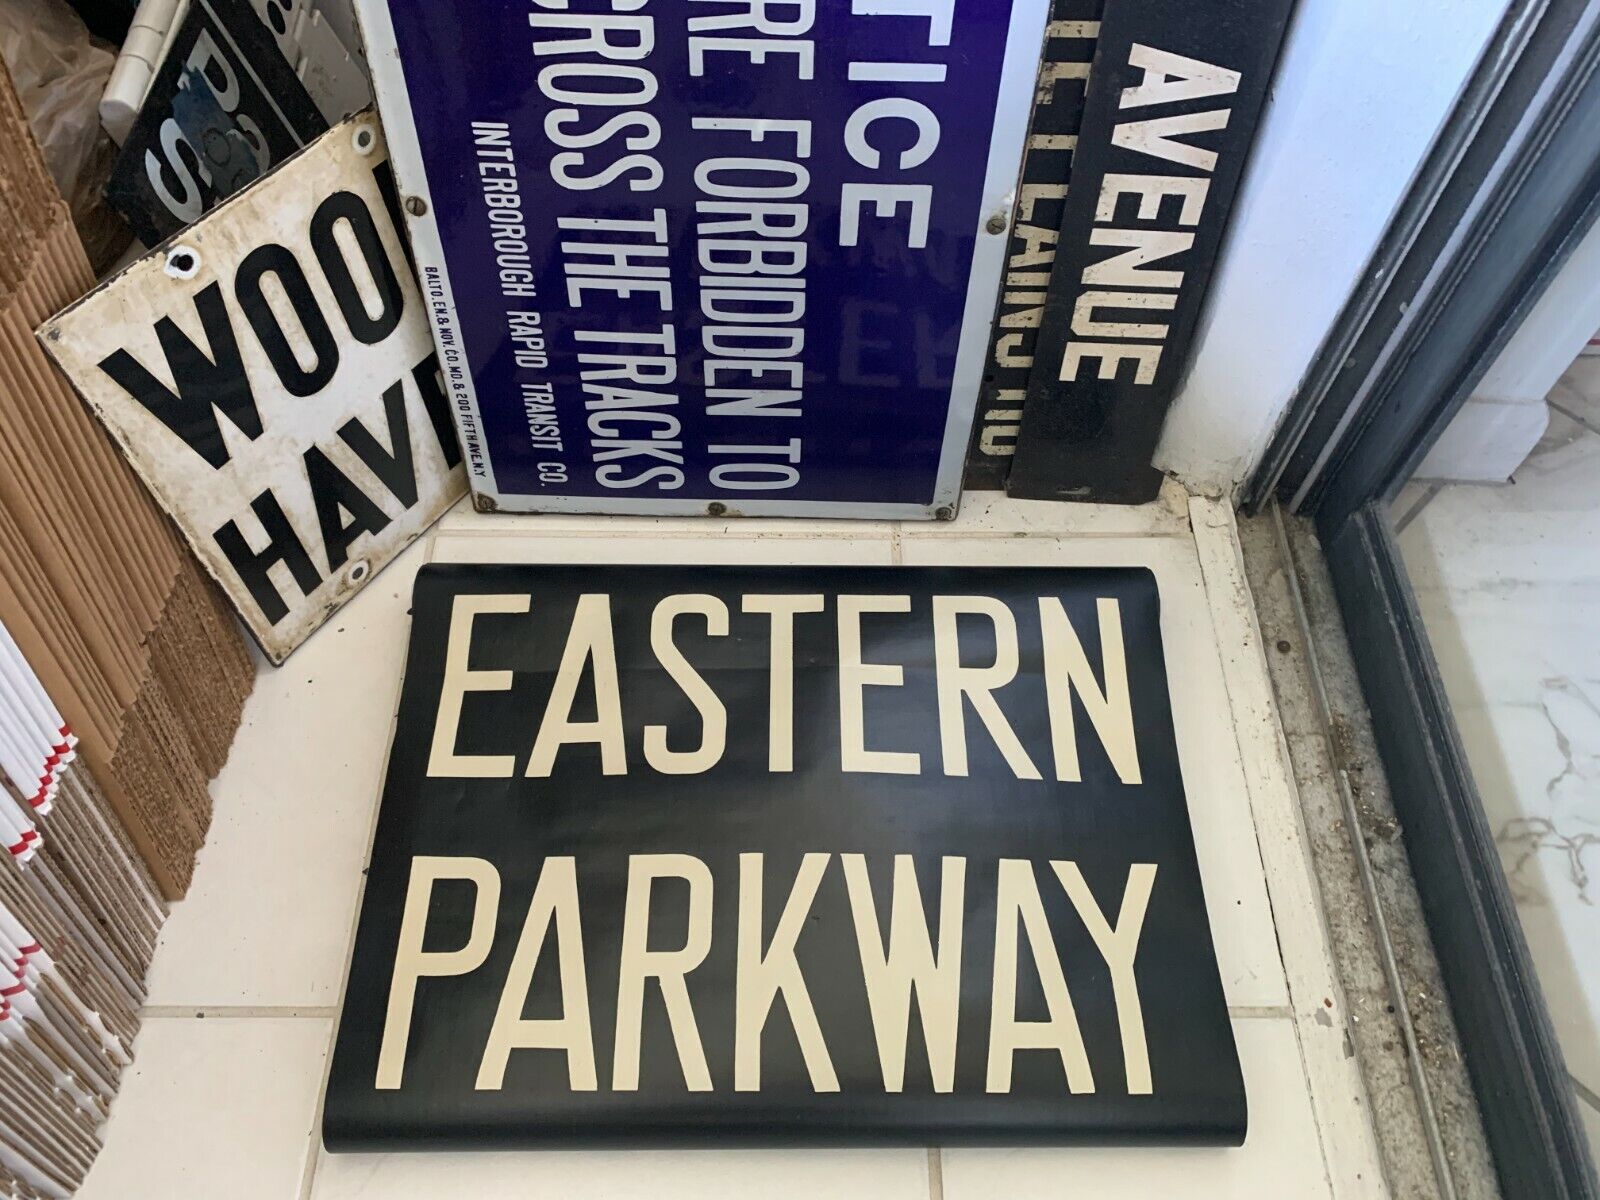 1948 NY NYC SUBWAY ROLL SIGN BROOKLYN EASTERN PARKWAY BUSHWICK PROSPECT HEIGHTS